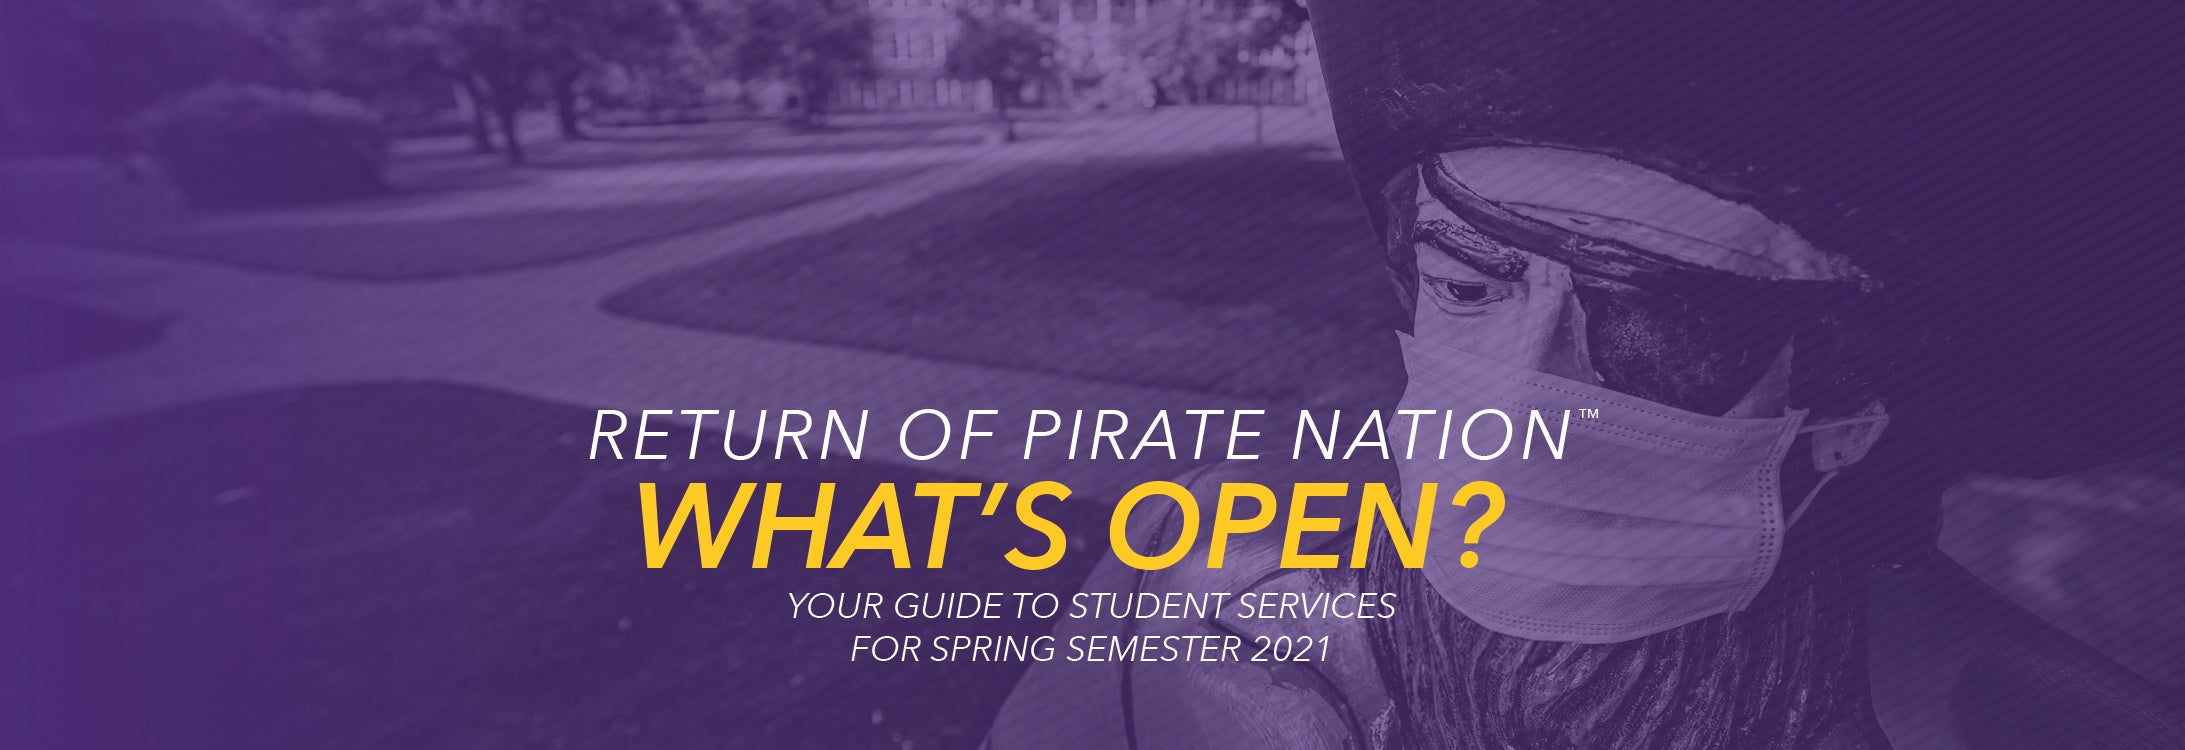 Return of Pirate Nation: What's Open? Your Guide to Student Services for Spring Semester 2021.